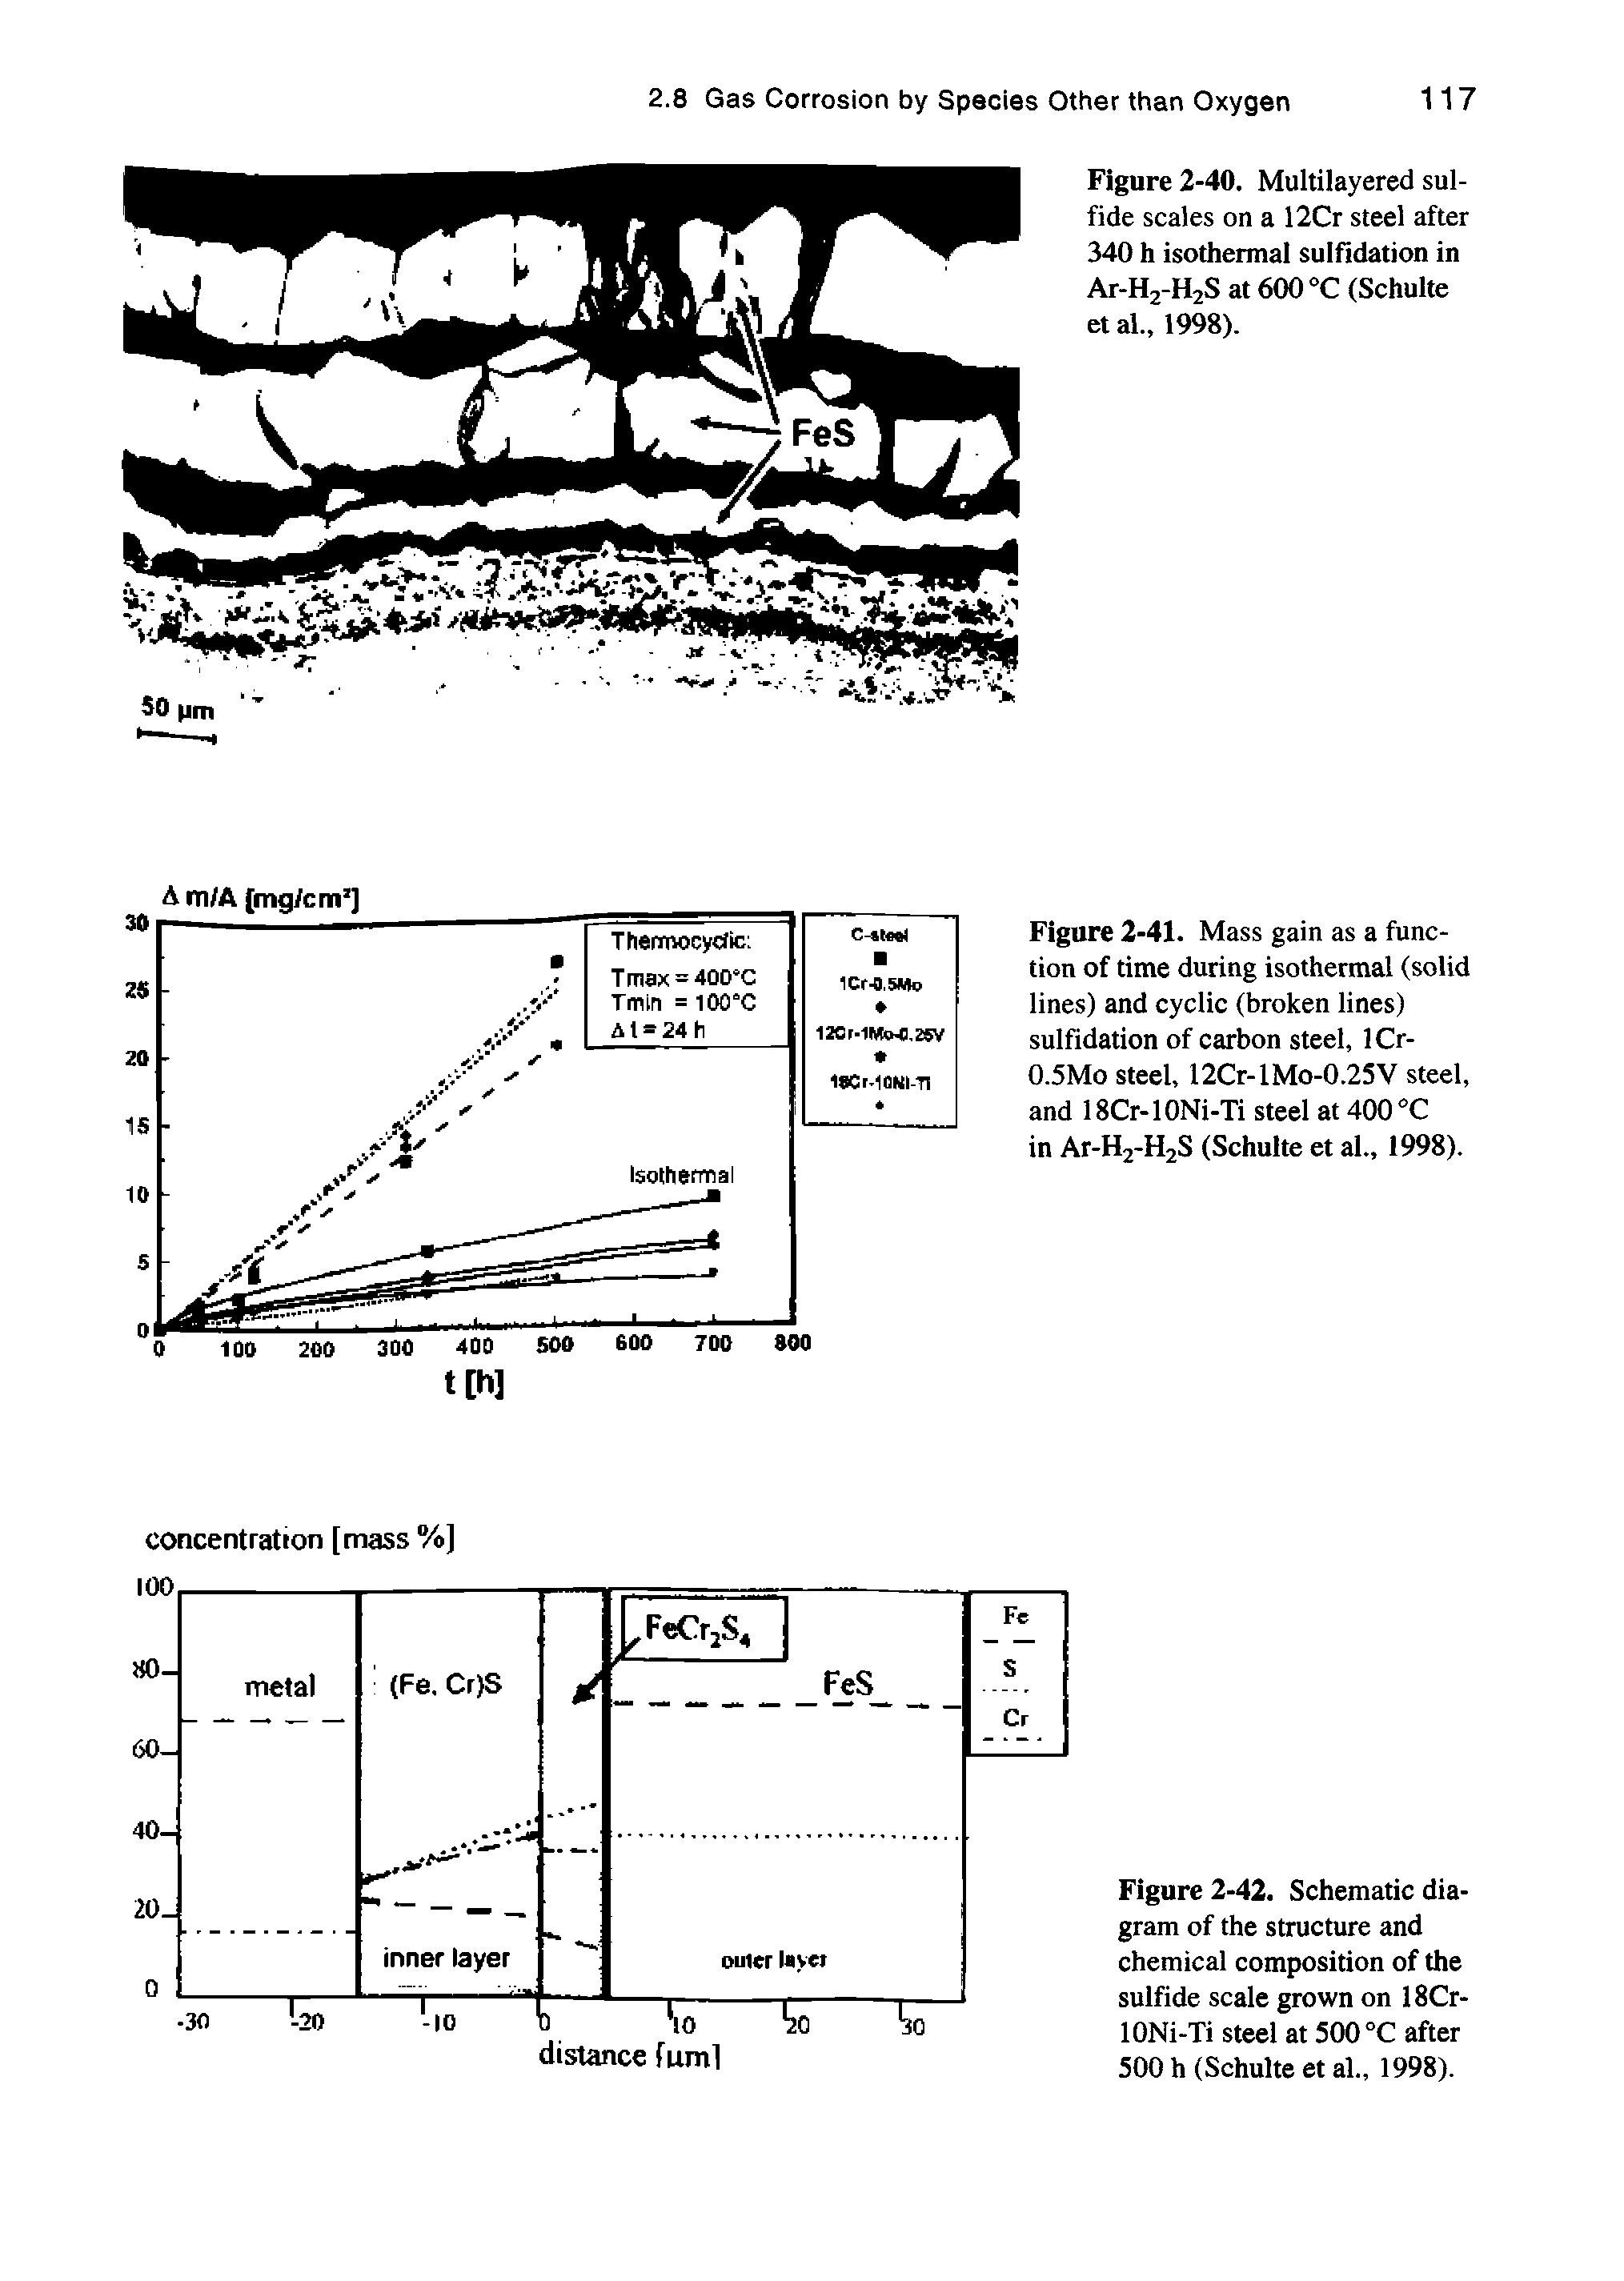 Figure 2-40. Multilayered sulfide scales on a 12Cr steel after 340 h isothermal sulfidation in Ar-H2-H2S at 600 °C (Schulte et al 1998).